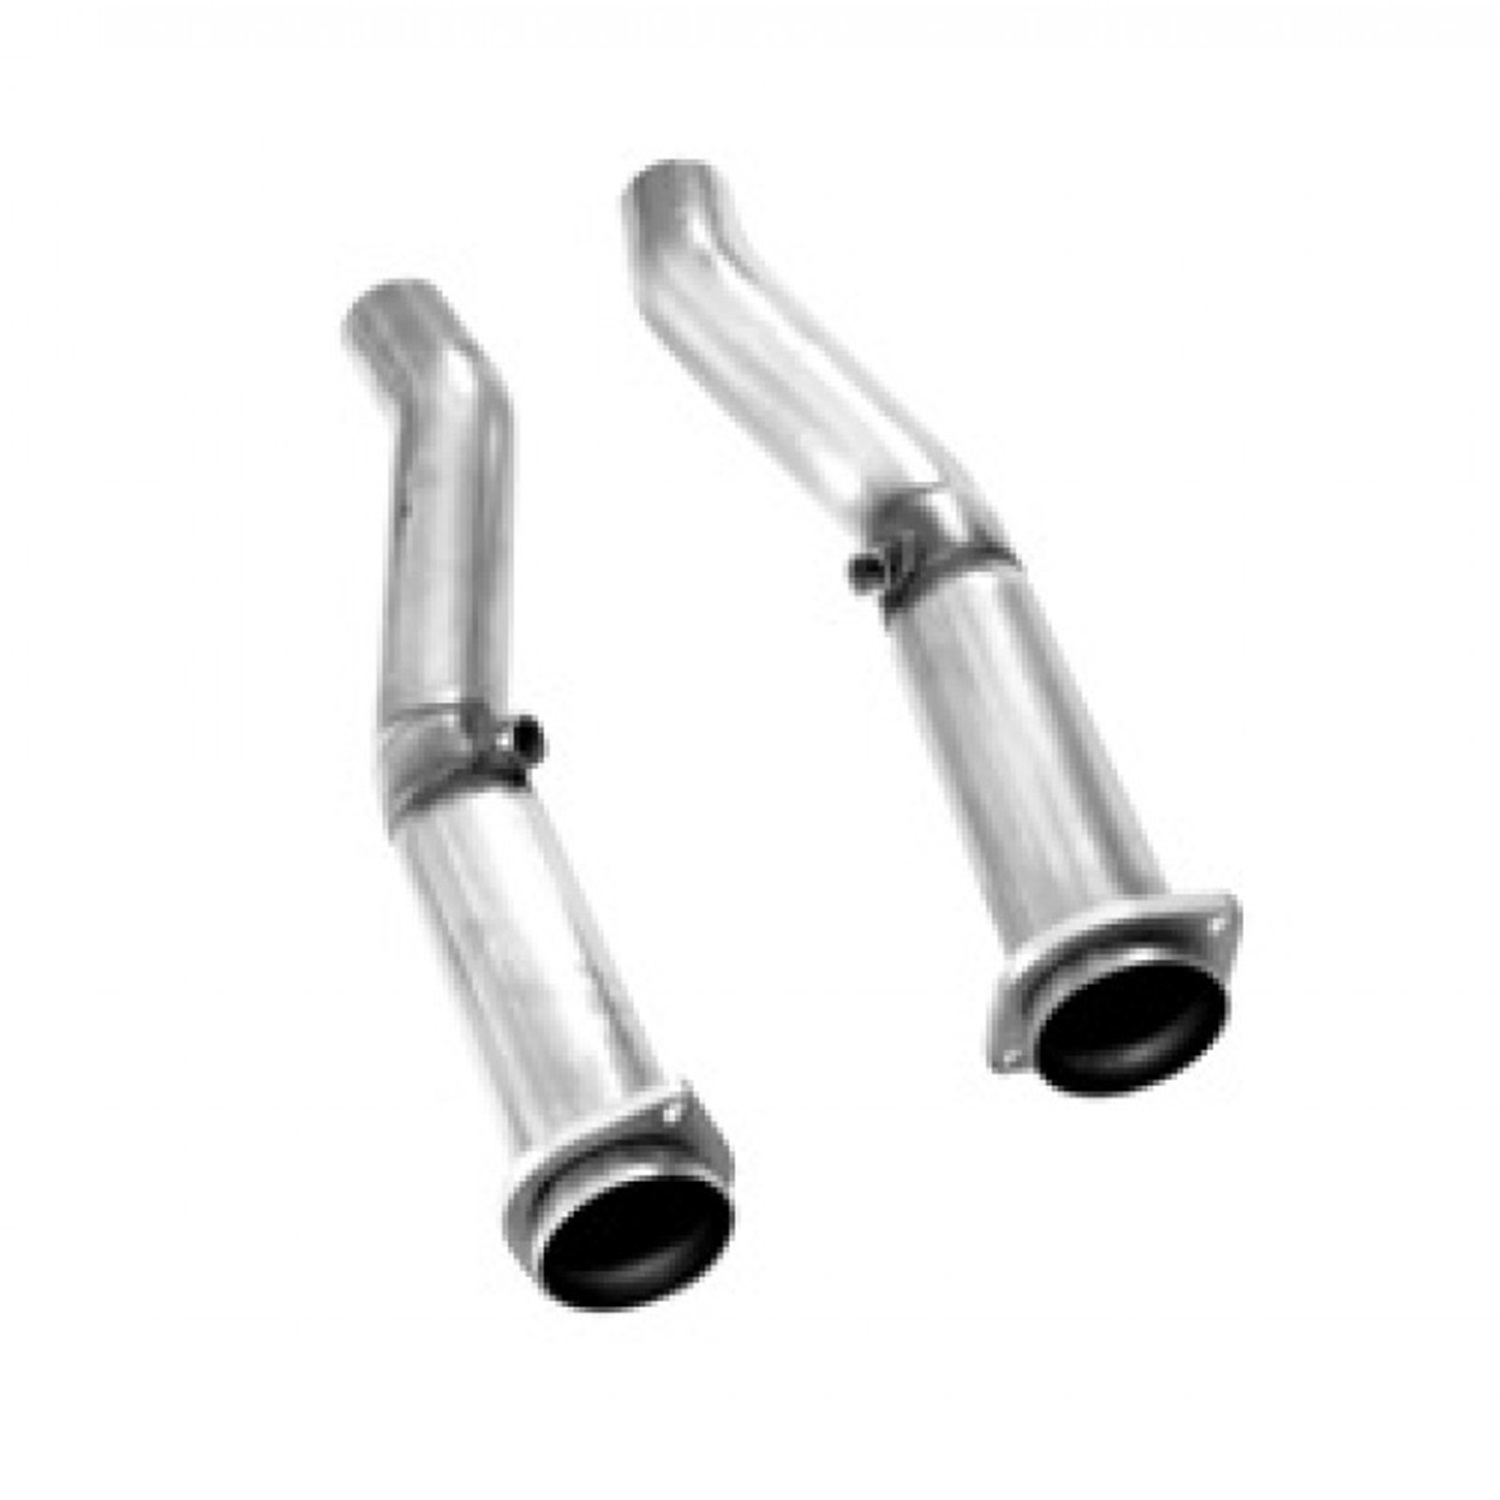 Off Road Connection Pipes 3 x 2.5" Corsa Stainless Steel Non Catted Connects To Center Resonator